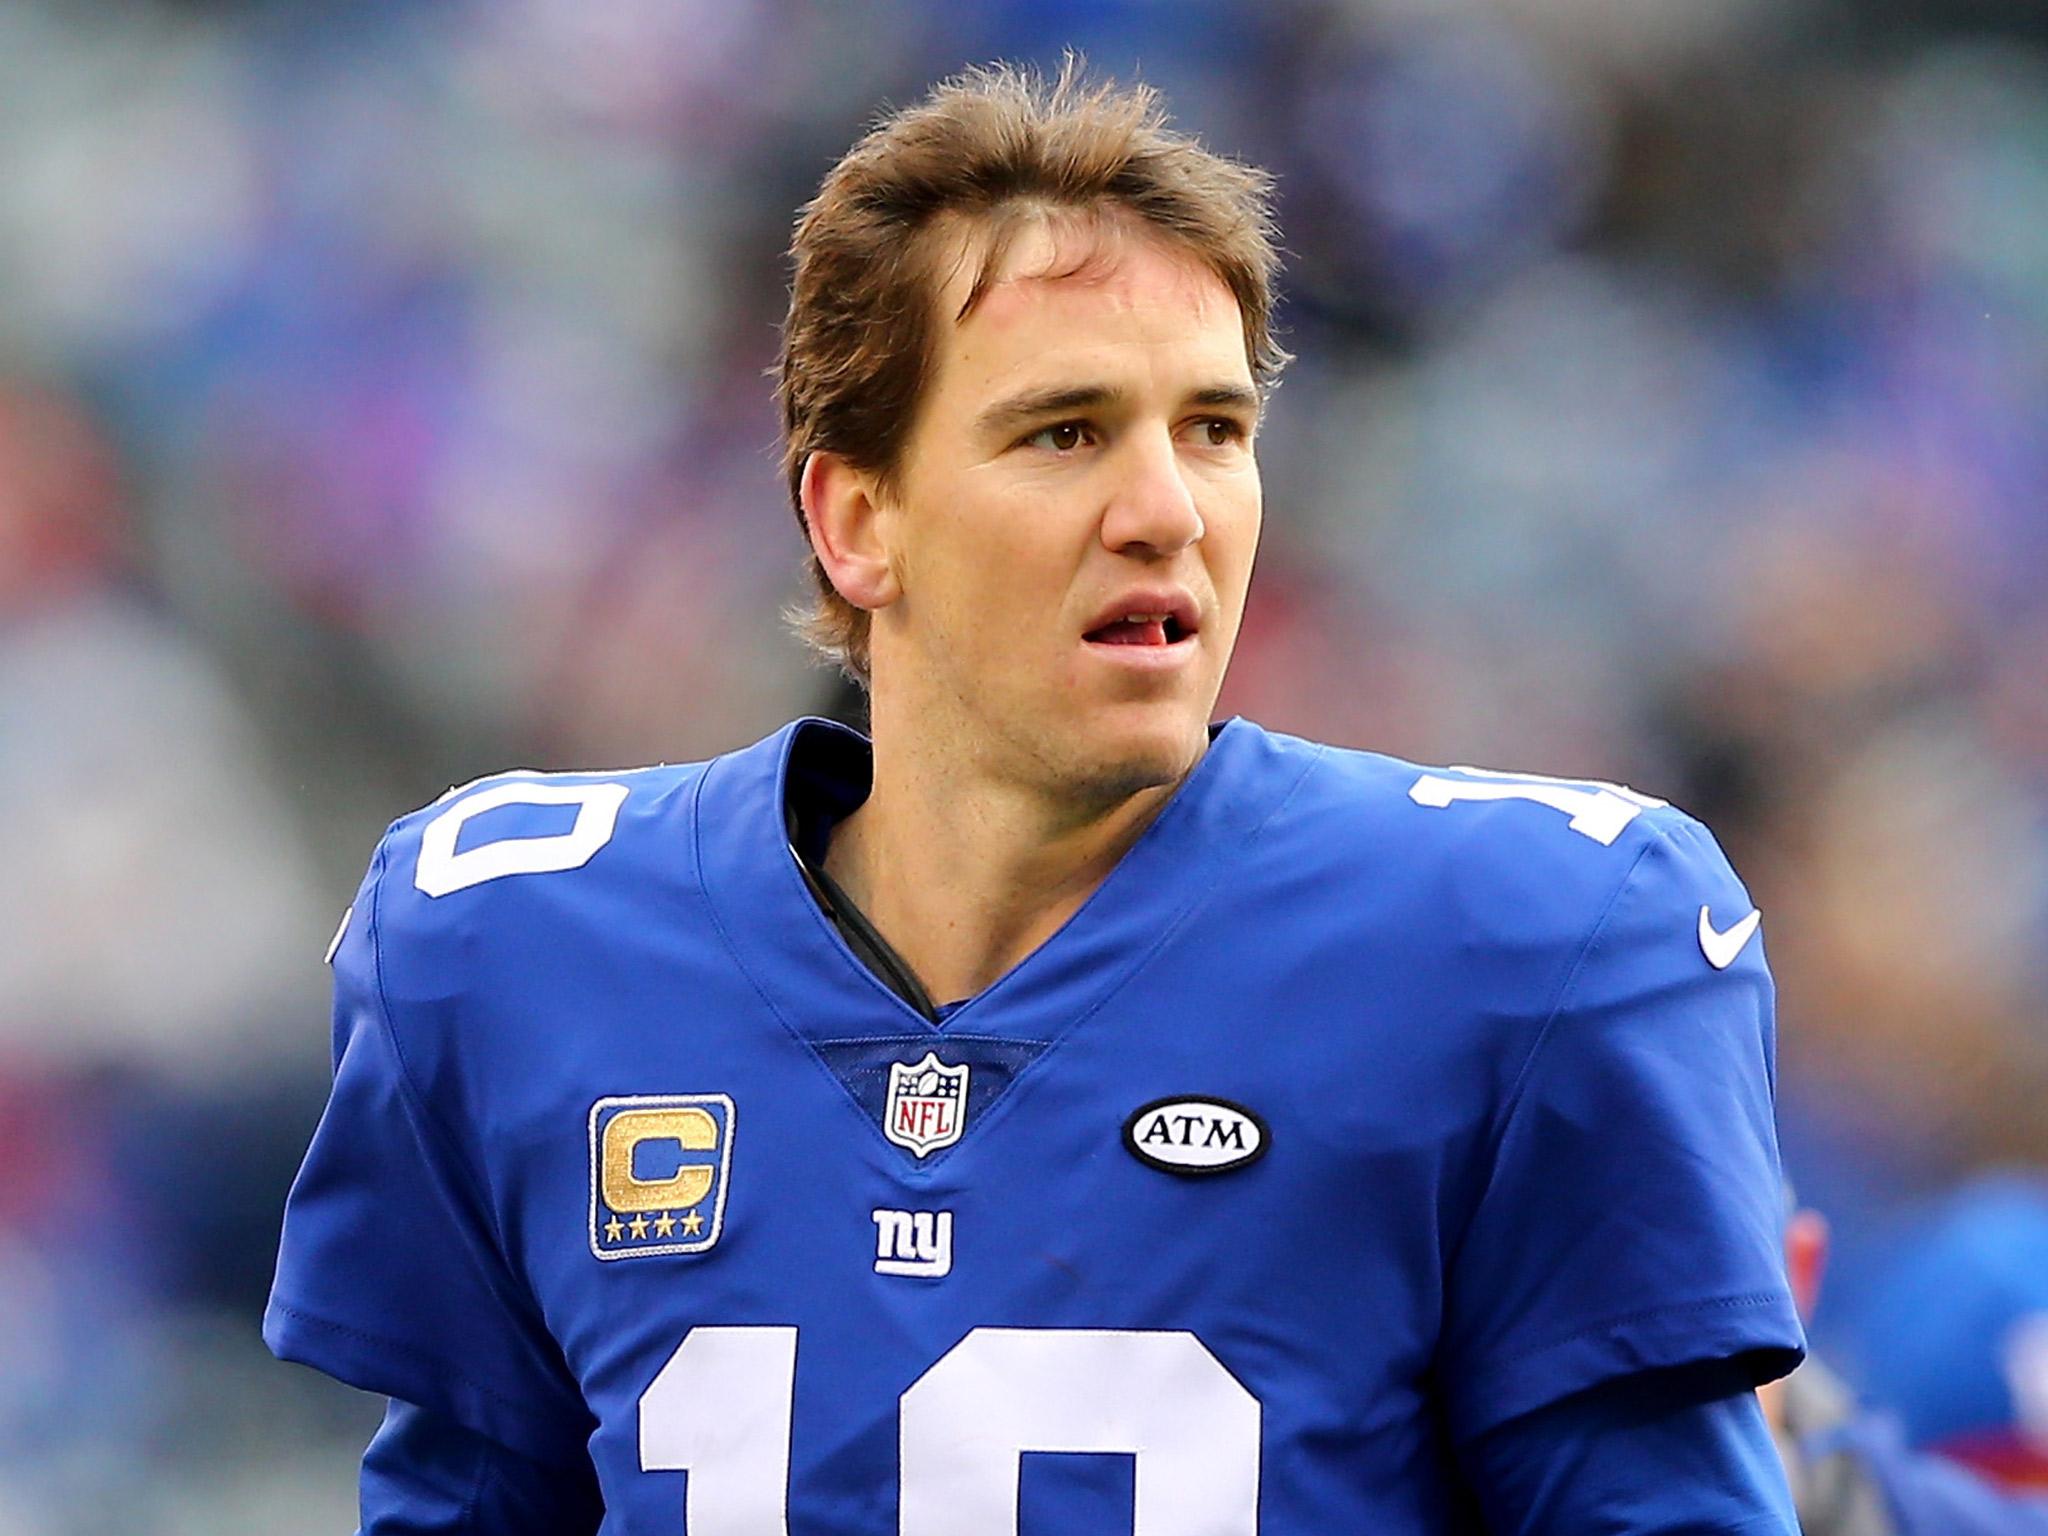 Eli Manning is one of those under the microscope